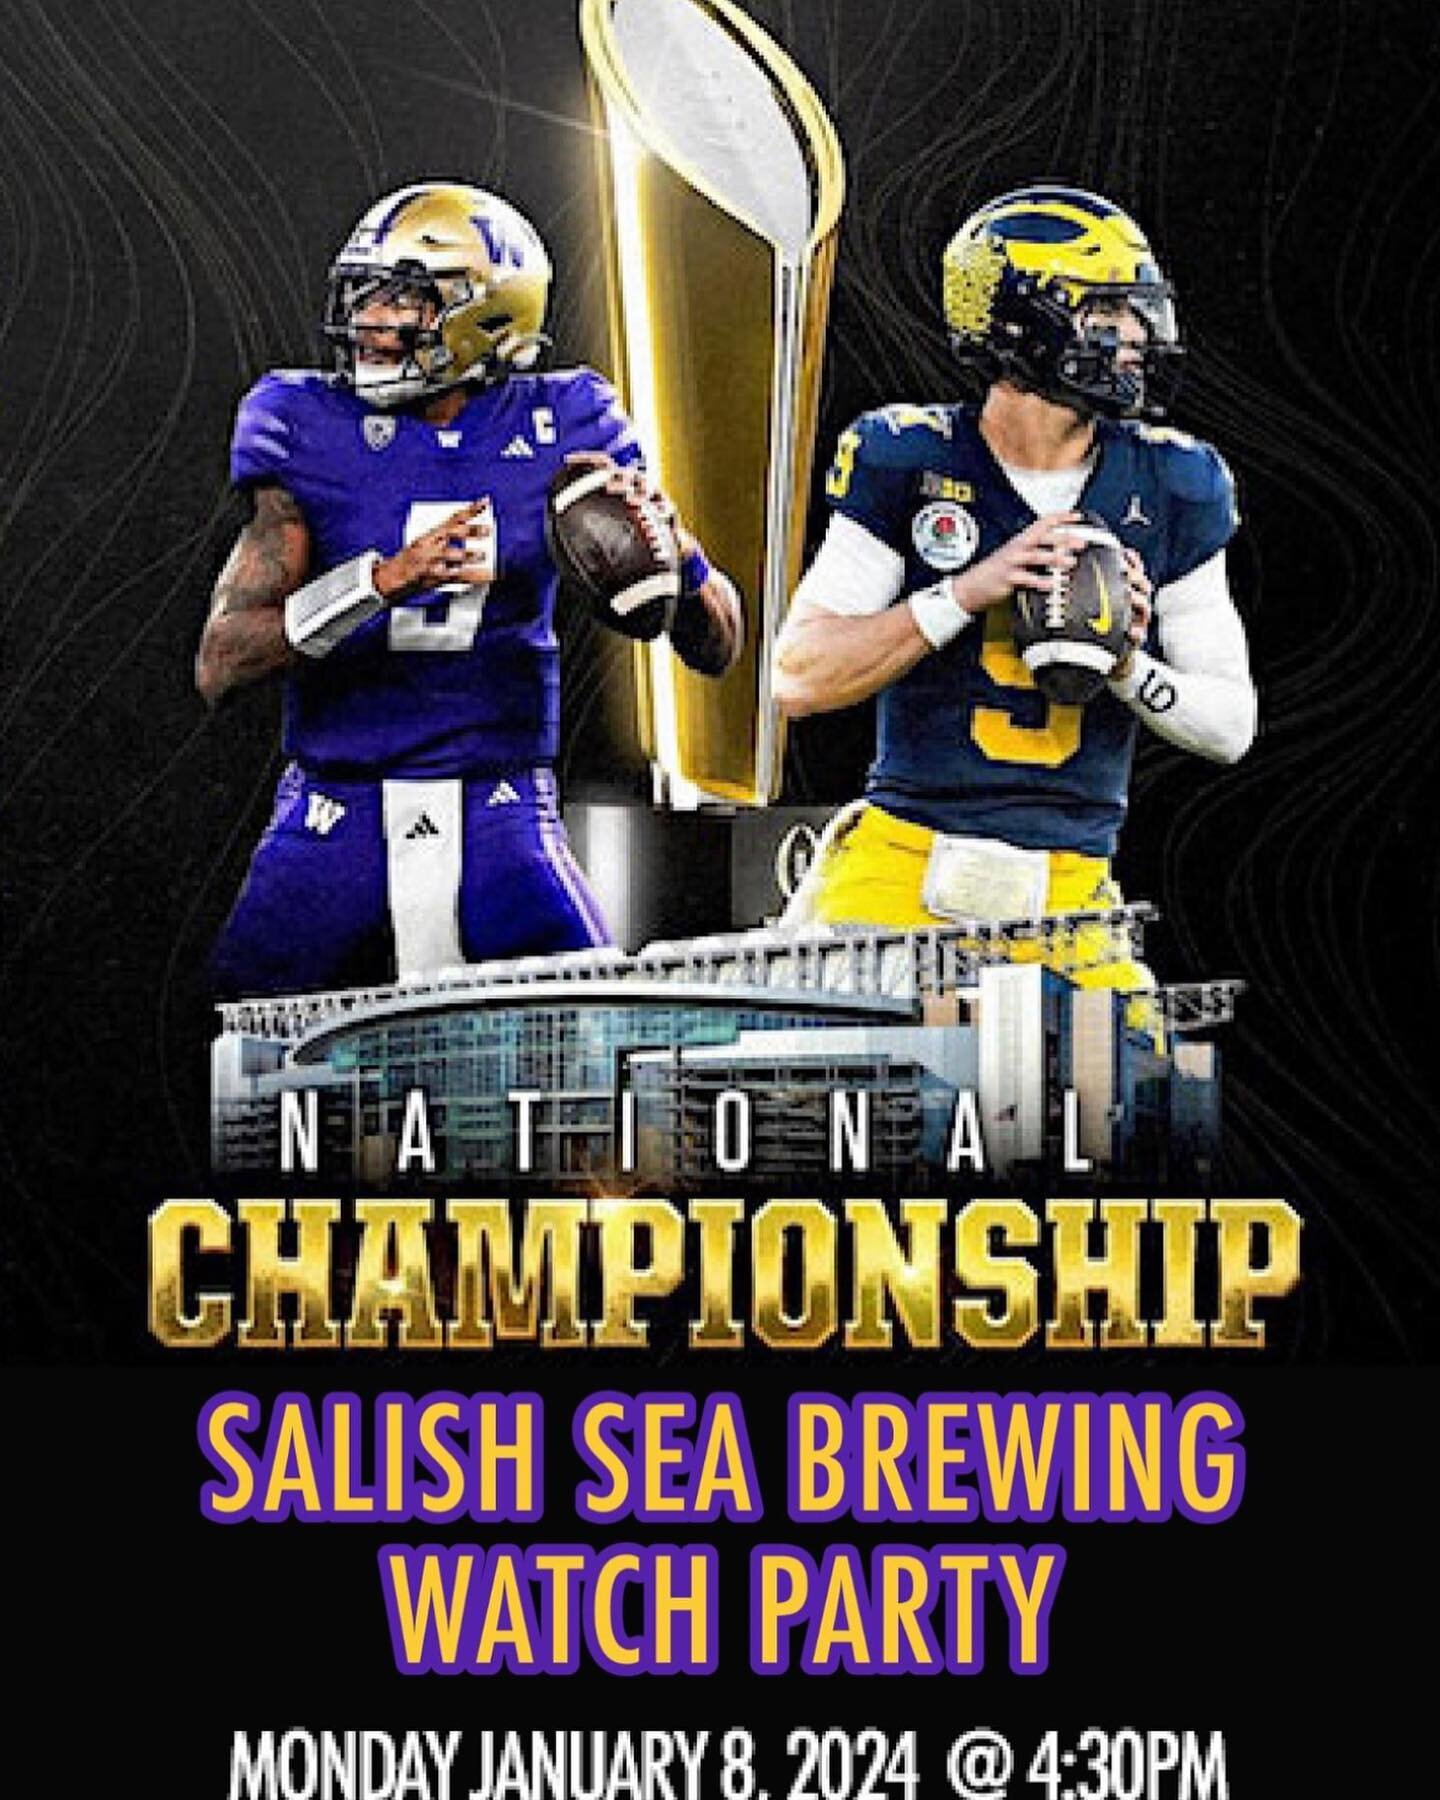 We will be open at BOTH locations this Monday 1/8 for the 2024 College Football National Championship Tailgate Party!

Come root on our Huskies as they take on No. 1 ranked Michigan Wolverines for all the marbles.  Kickoff at 4:30pm!

Salish Sea Brew